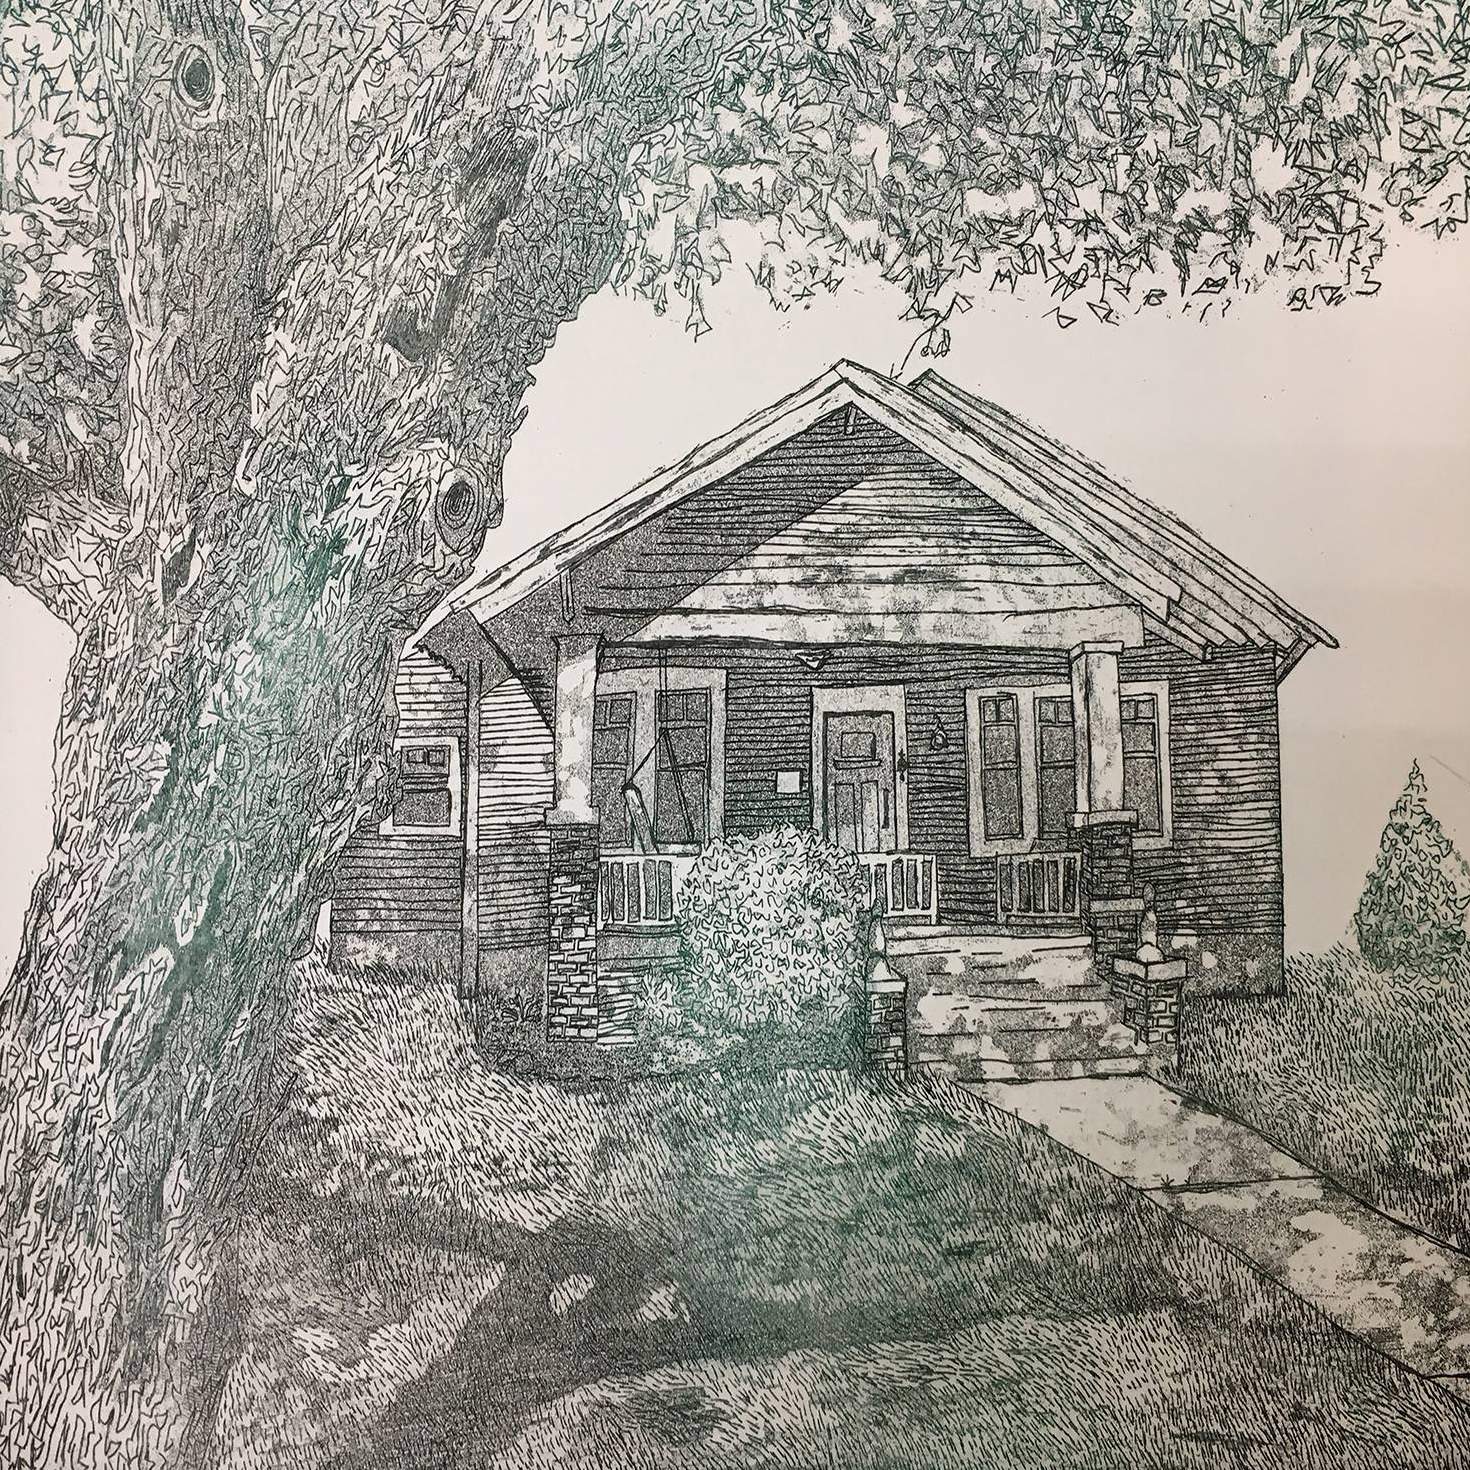 Student work: detailed print of a house with a large tree in the foreground